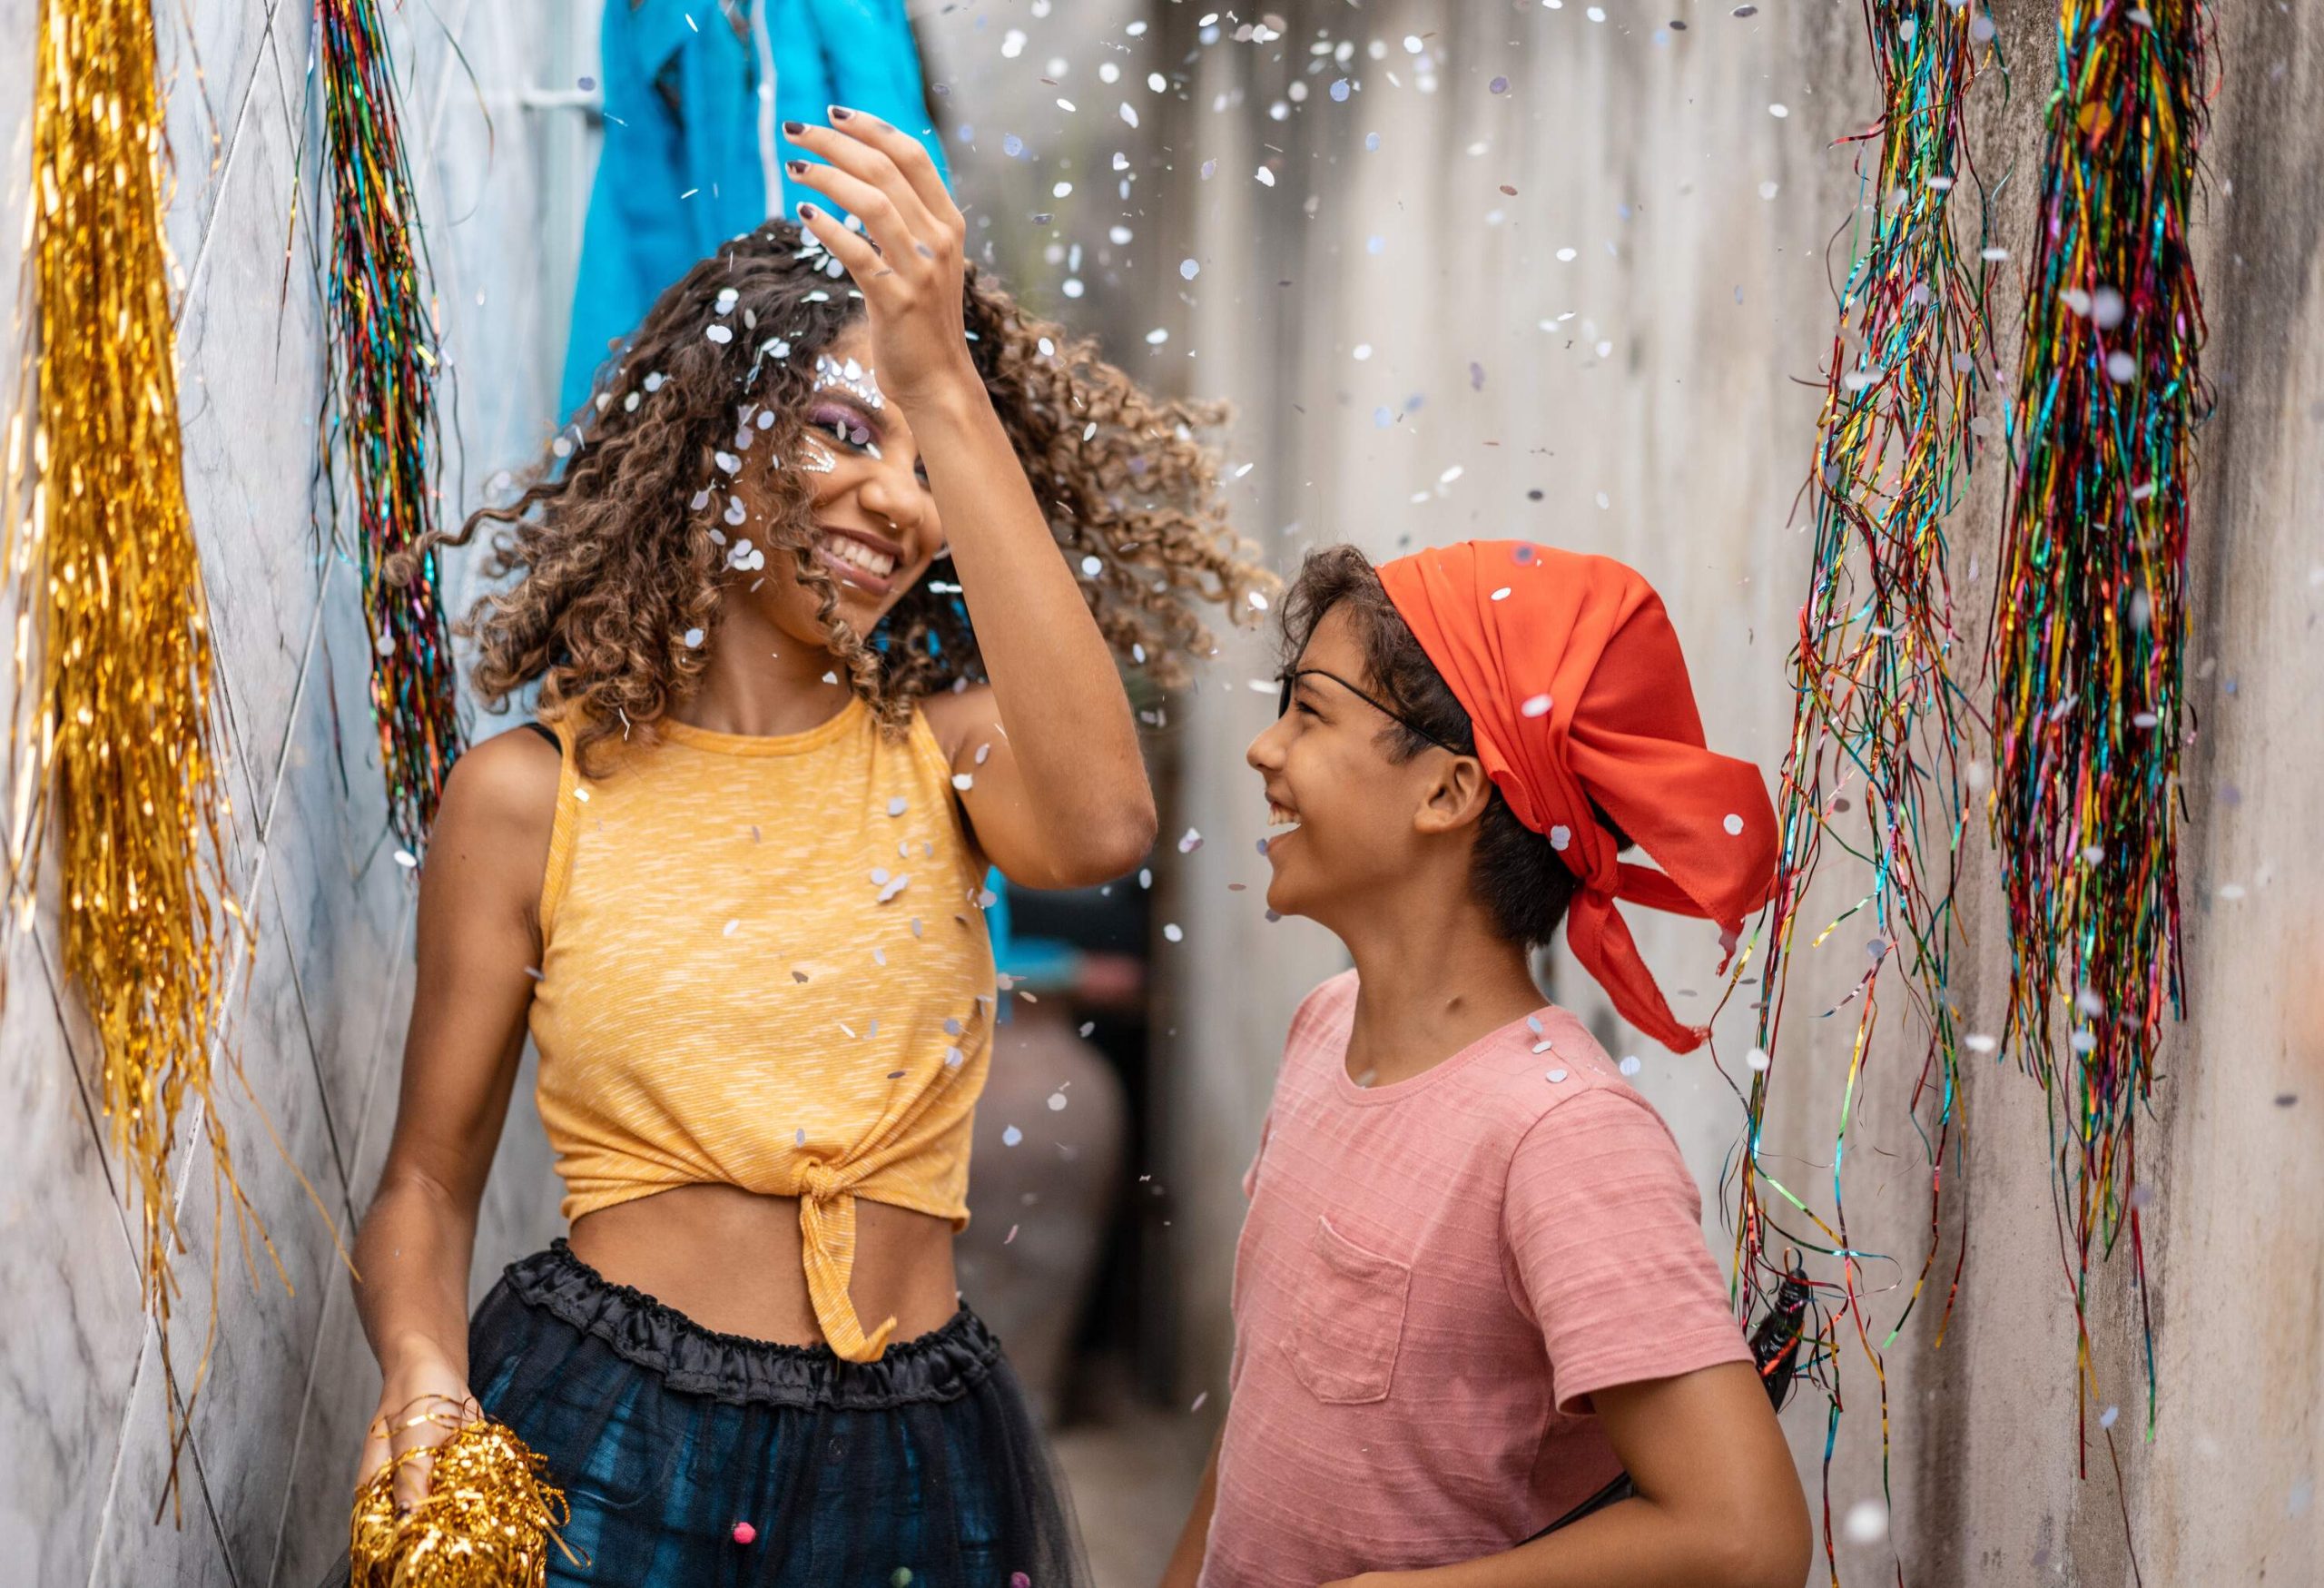 Two kids, one in orange shirt and the other in a red bandana, laugh together under the shower of confetti.